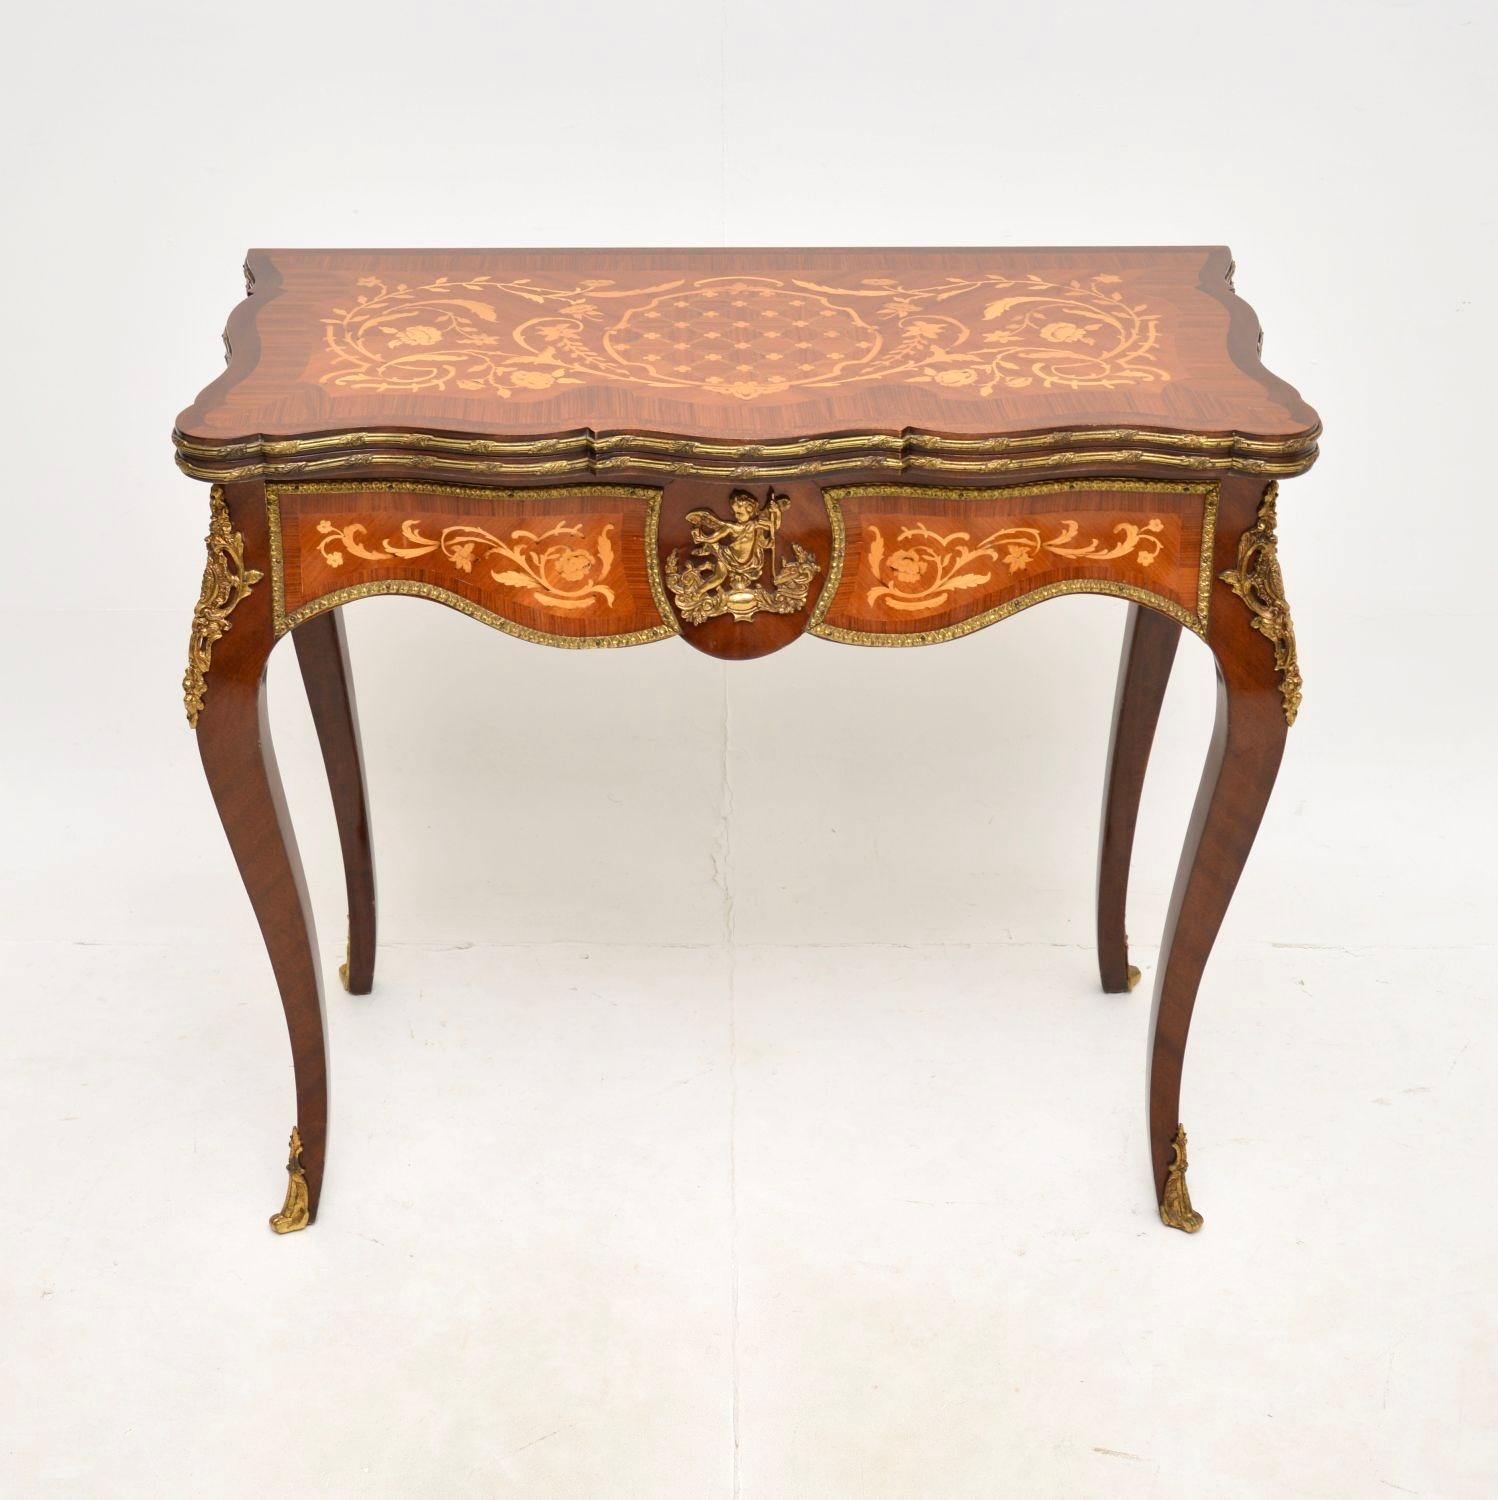 An absolutely stunning antique French card / console table, dating from the 1920-30’s.

The quality is outstanding, this has a gorgeous design with lots of nice features. The wood is predominantly walnut, with profuse inlays of satinwood and various